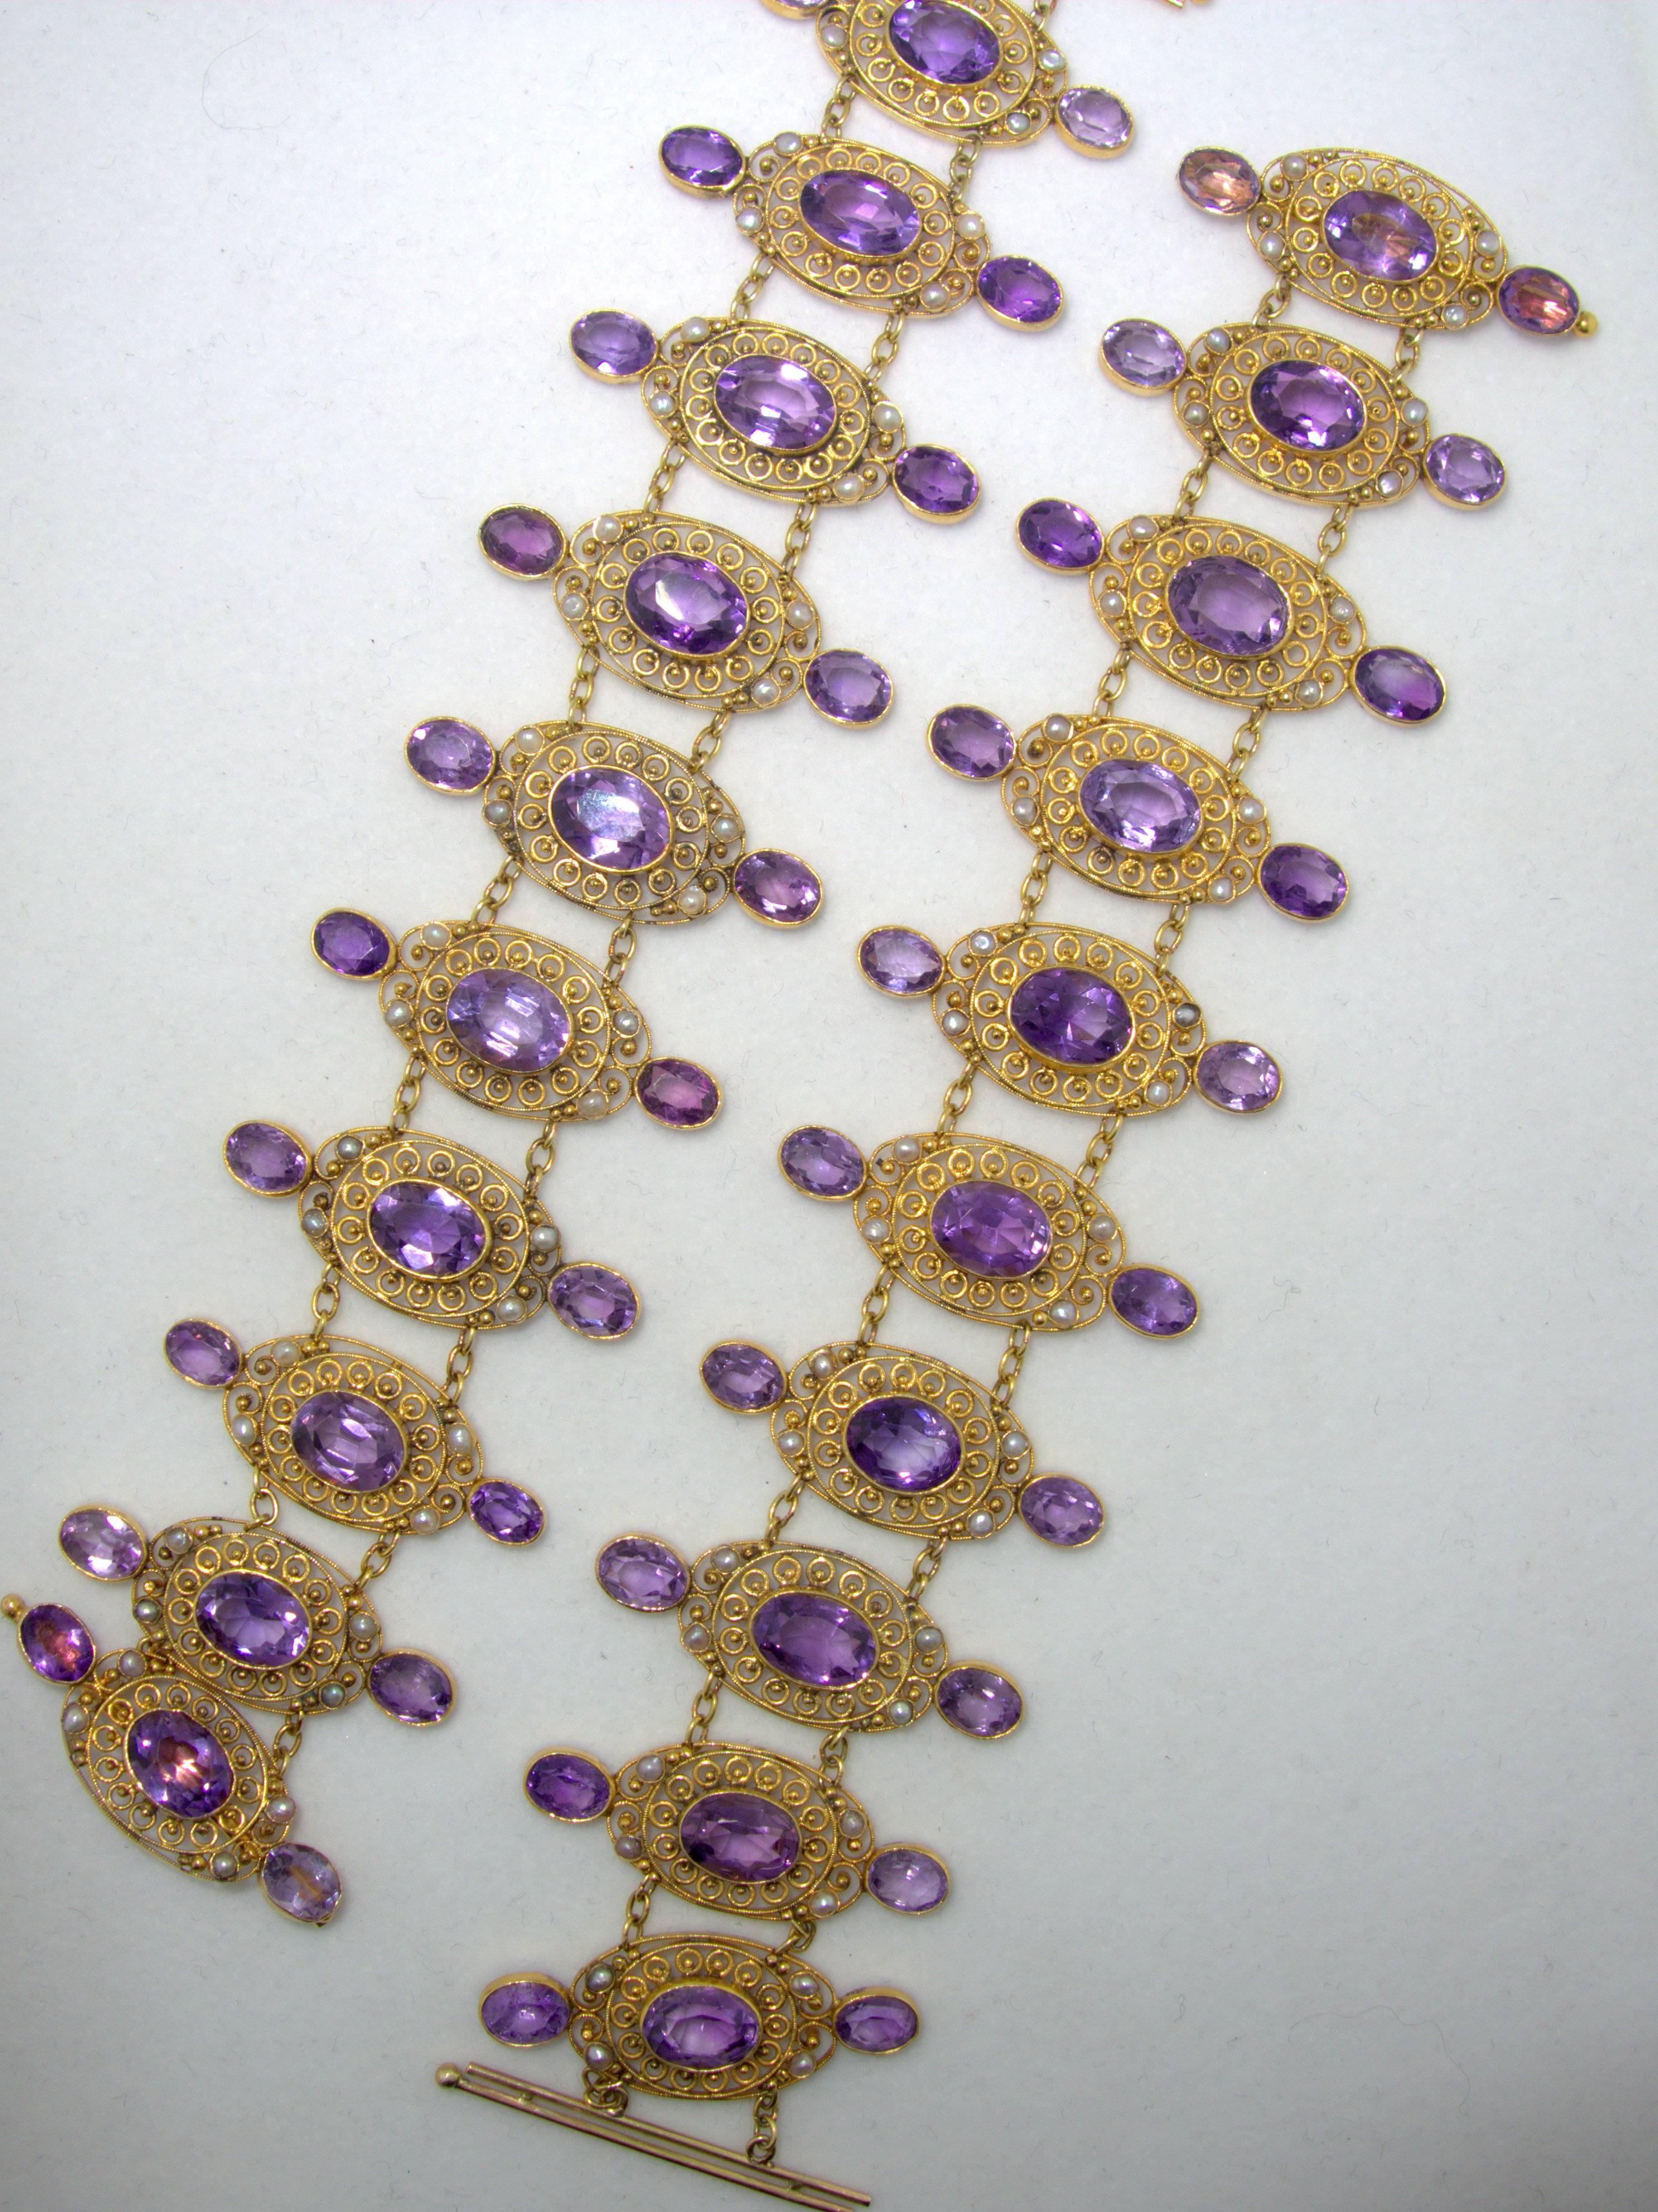 Victorian Matching Amethyst Pearl Gold Bracelets And Necklace 1